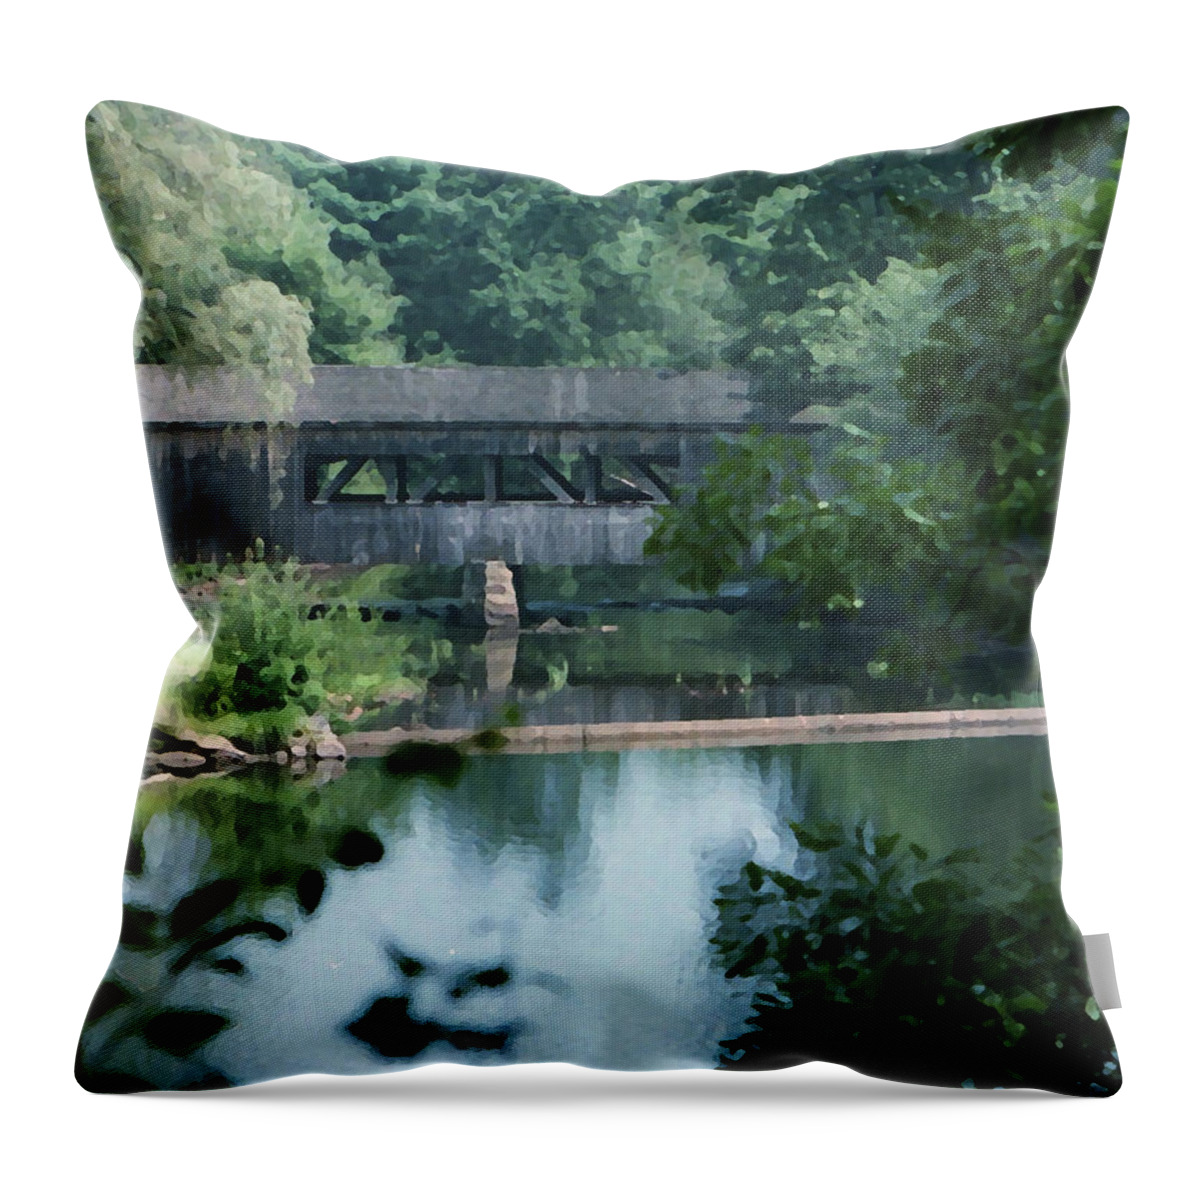 Covered Bridge Throw Pillow featuring the photograph Covered Bridge by Geoff Jewett